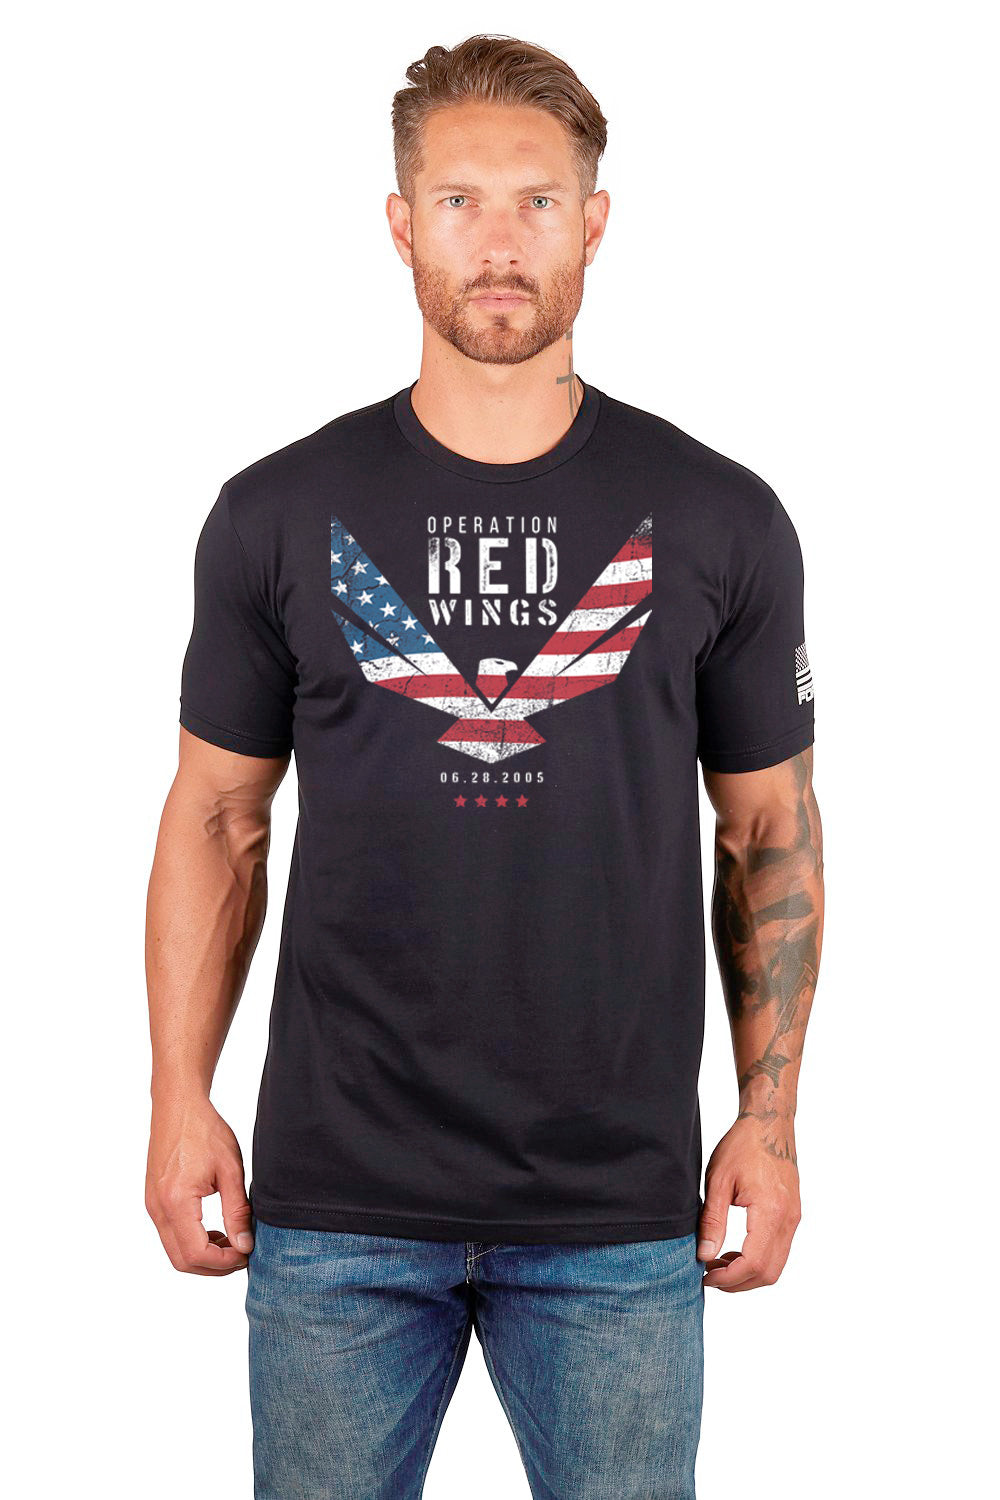 red wings shirts